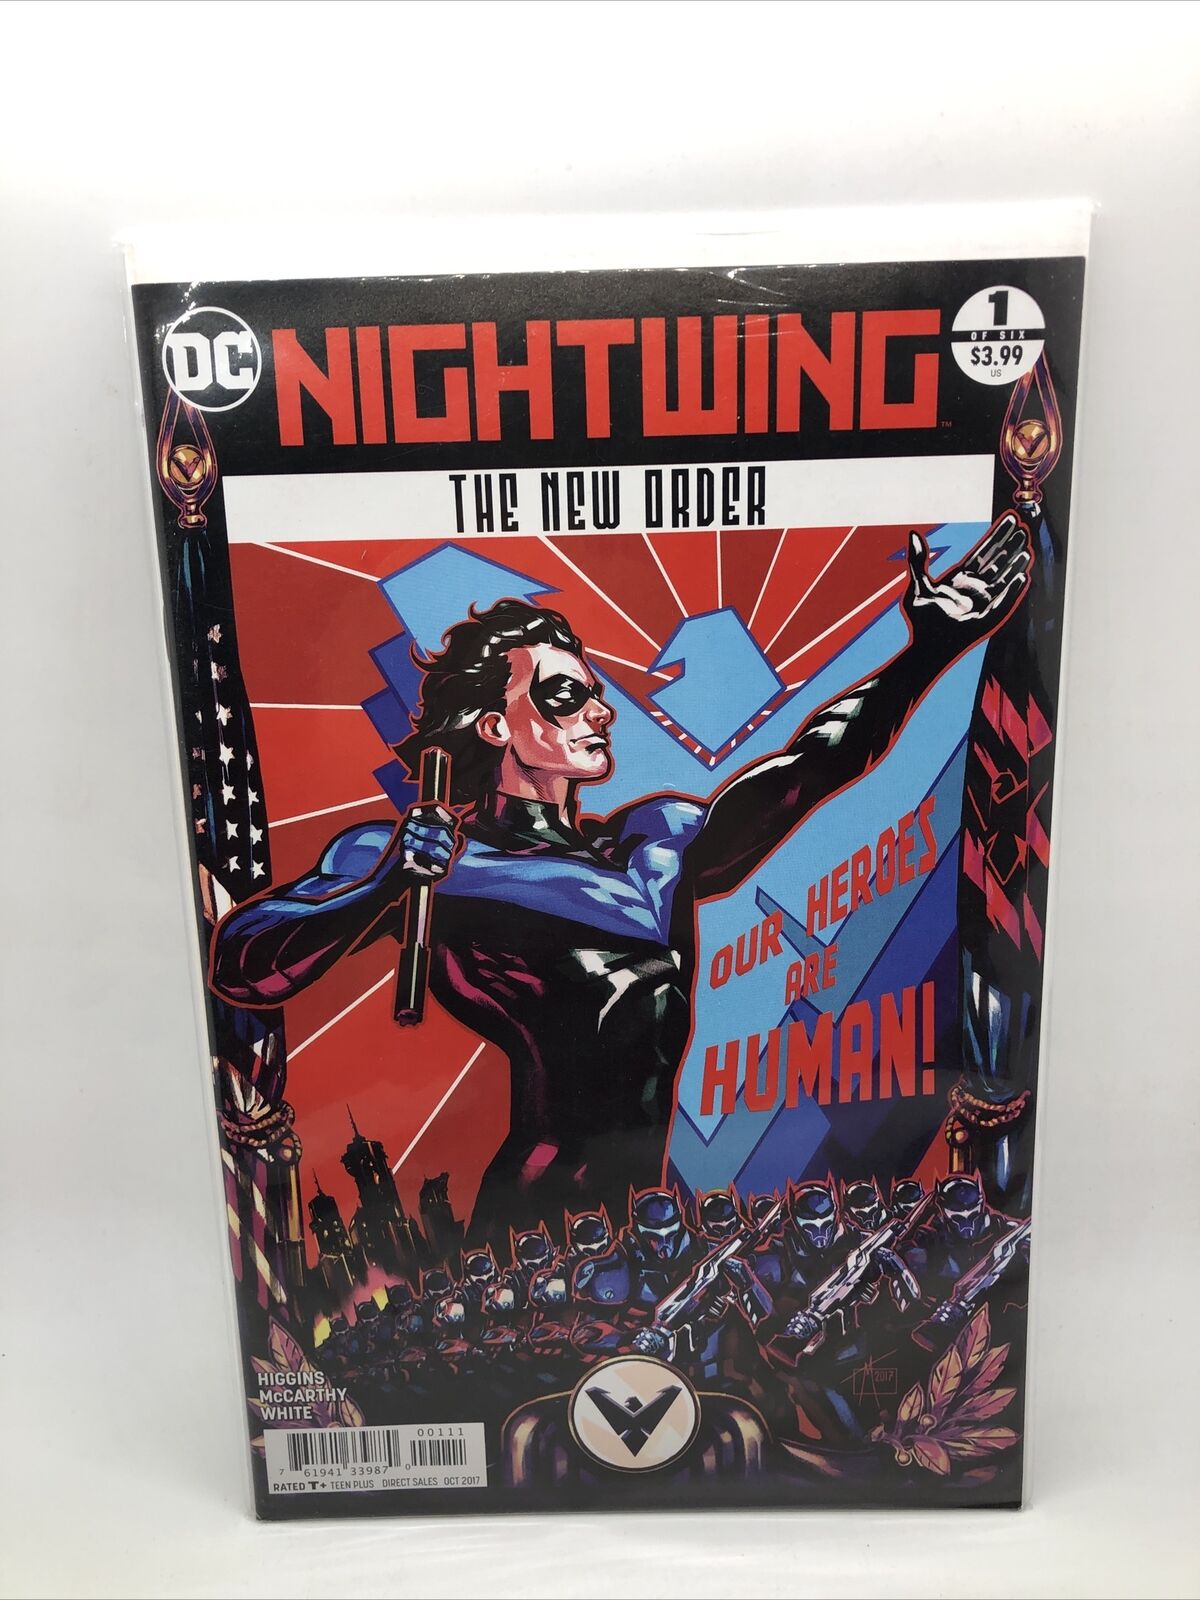 Nightwing: The New Order #1 1st Print